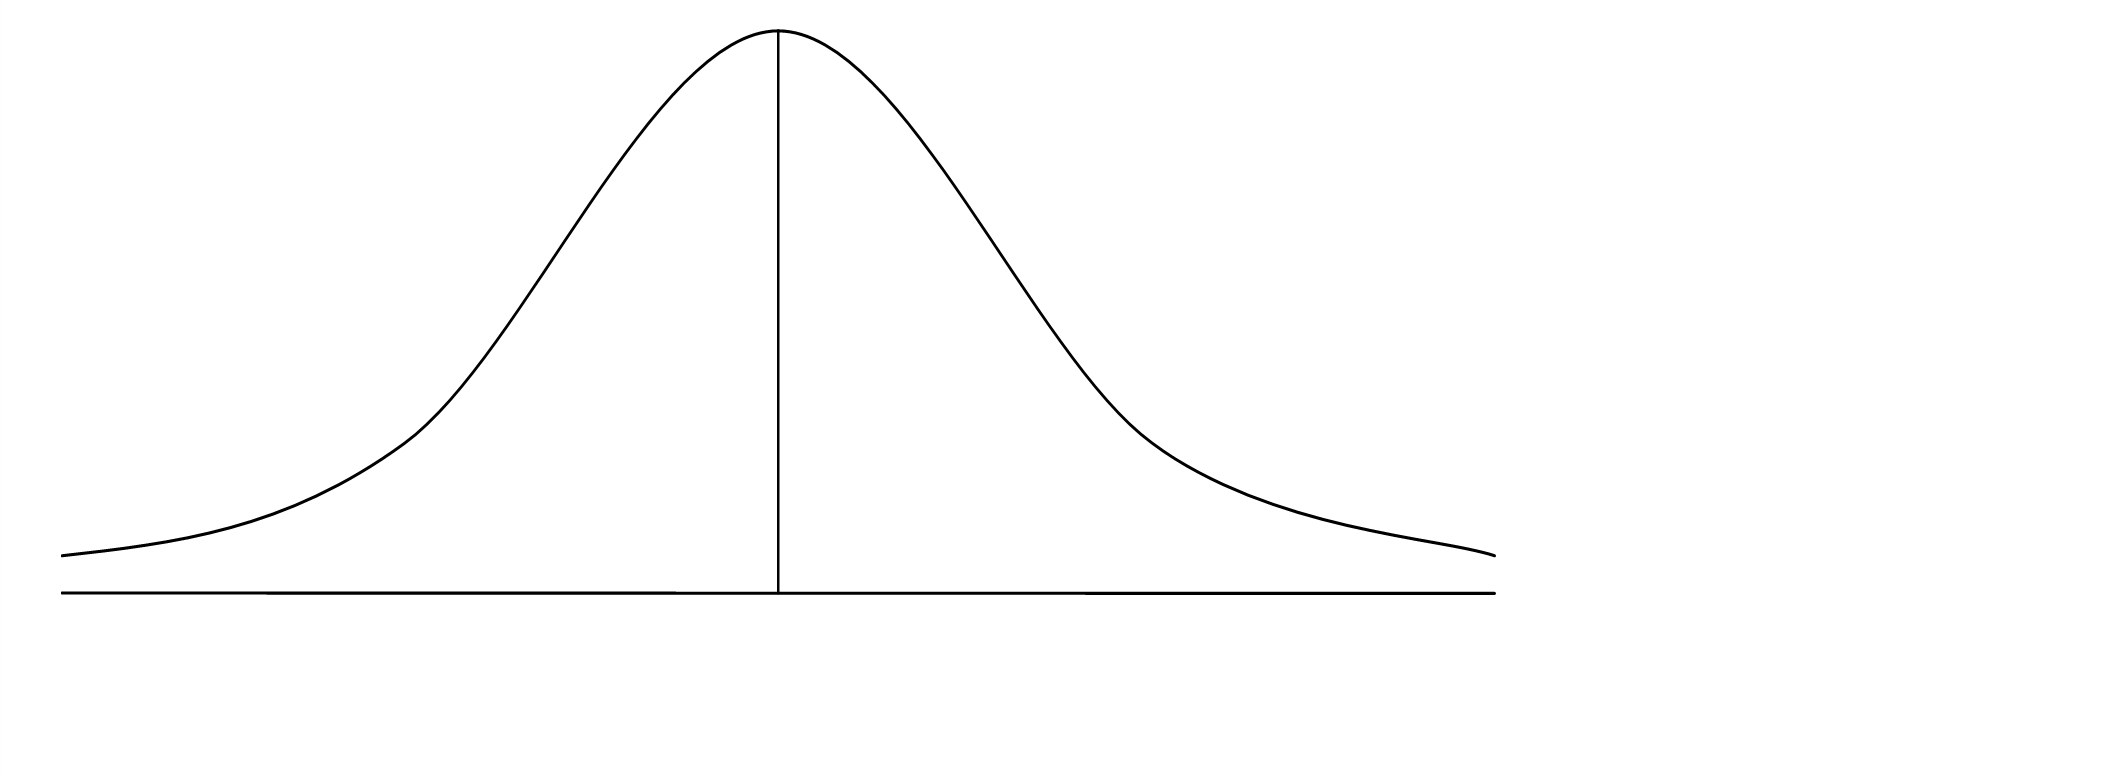 A blank normal curve for graphing the data for this problem.